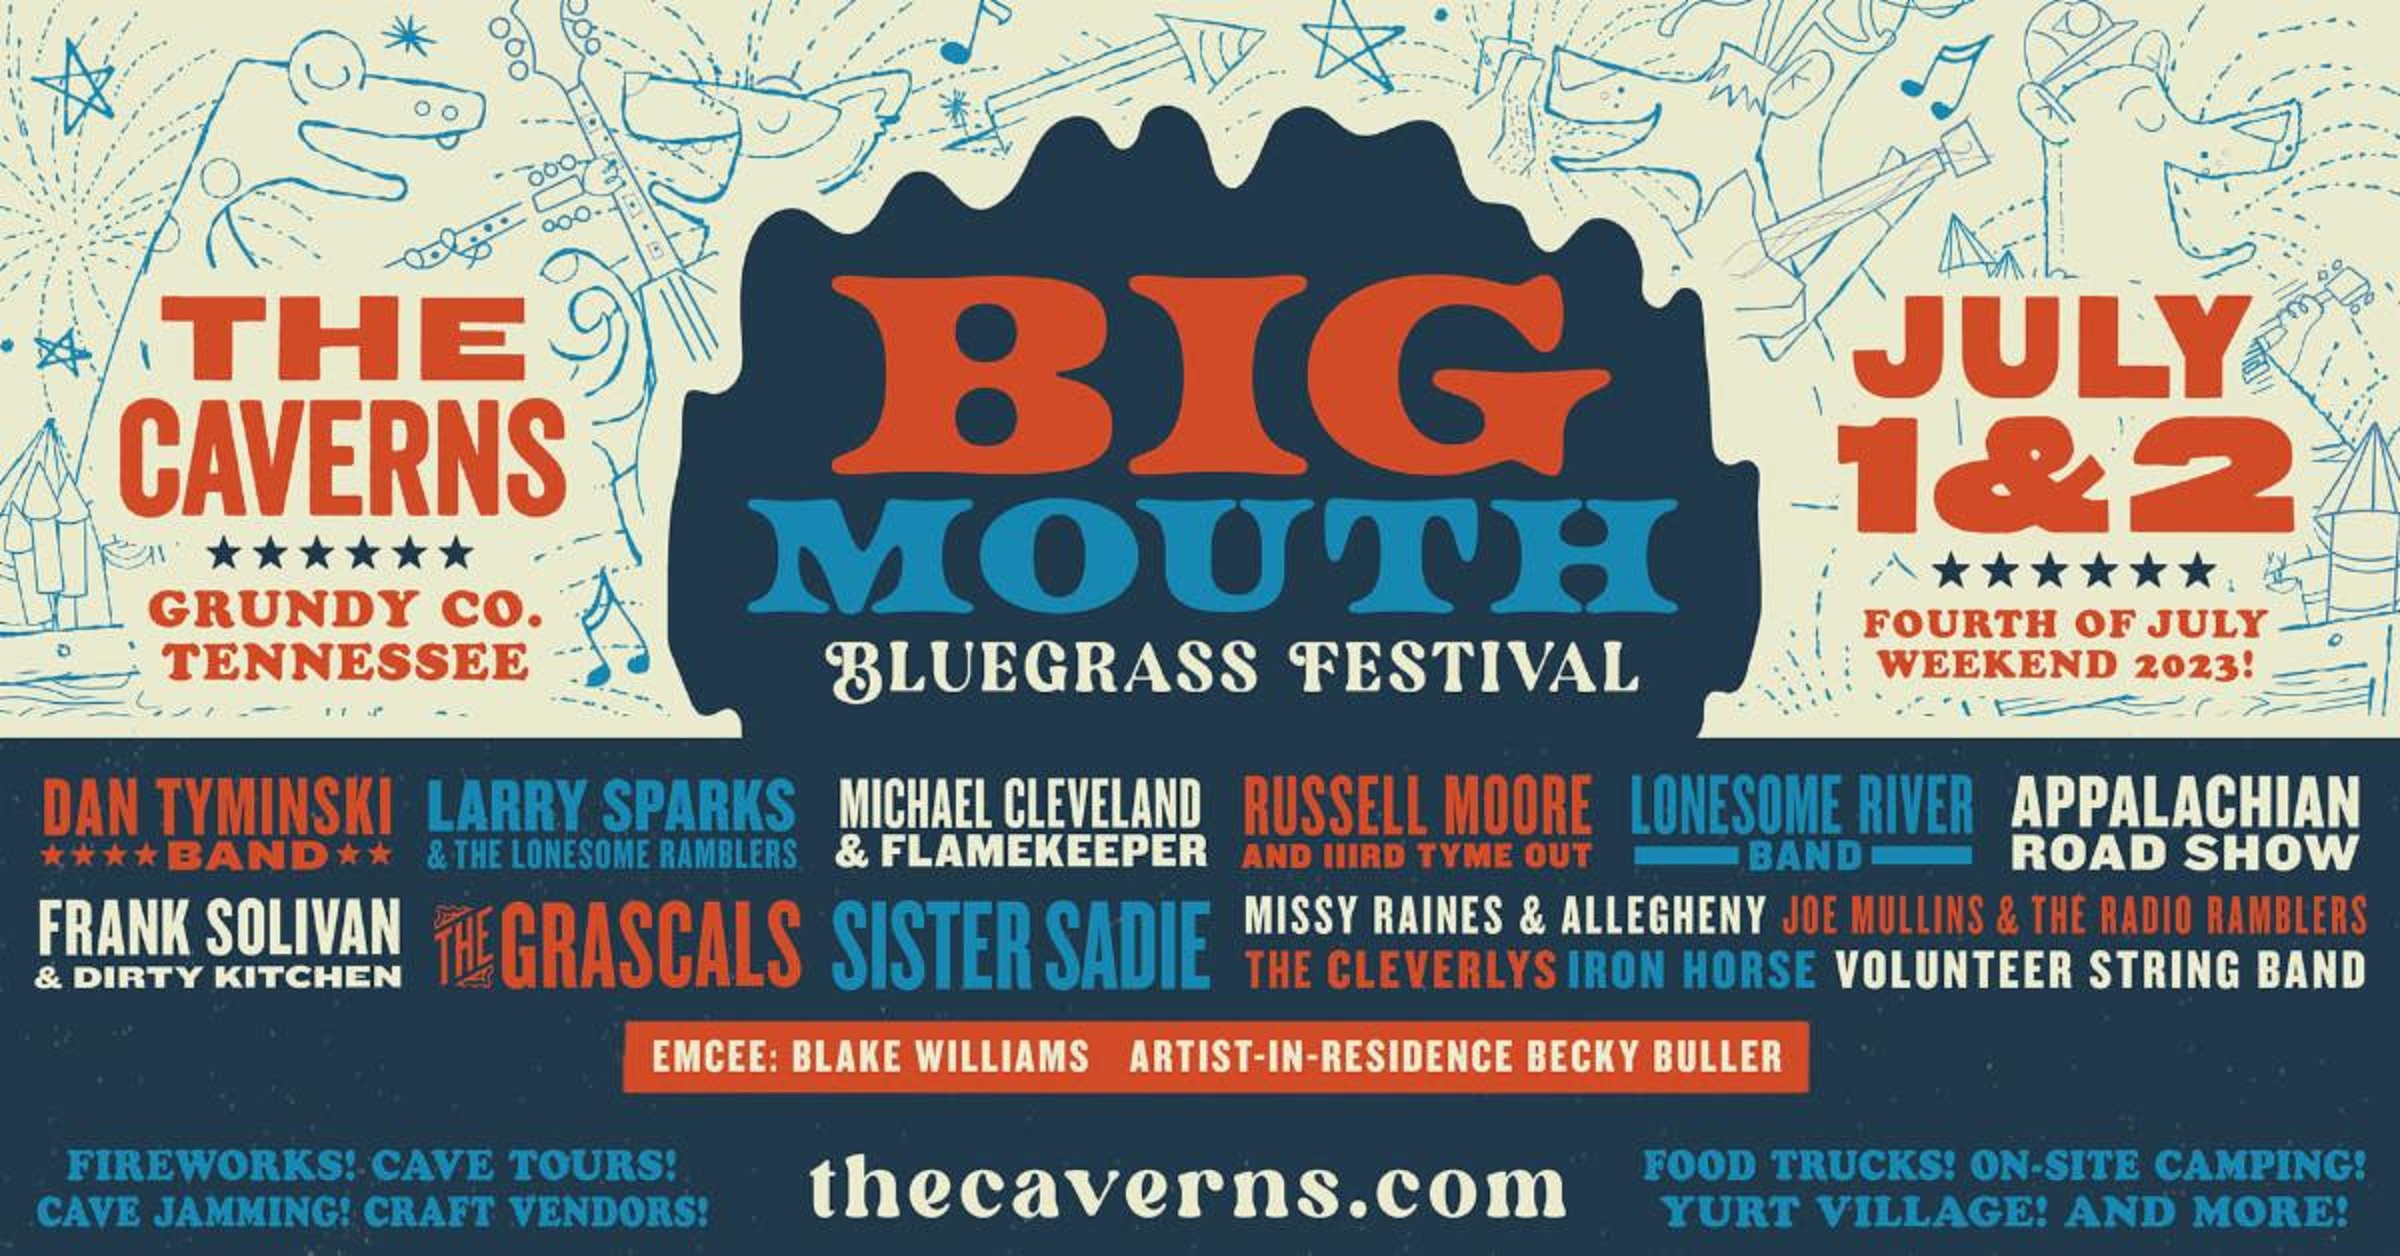 New Festival at The Caverns: Big Mouth Bluegrass Festival, July 1-2, 2023